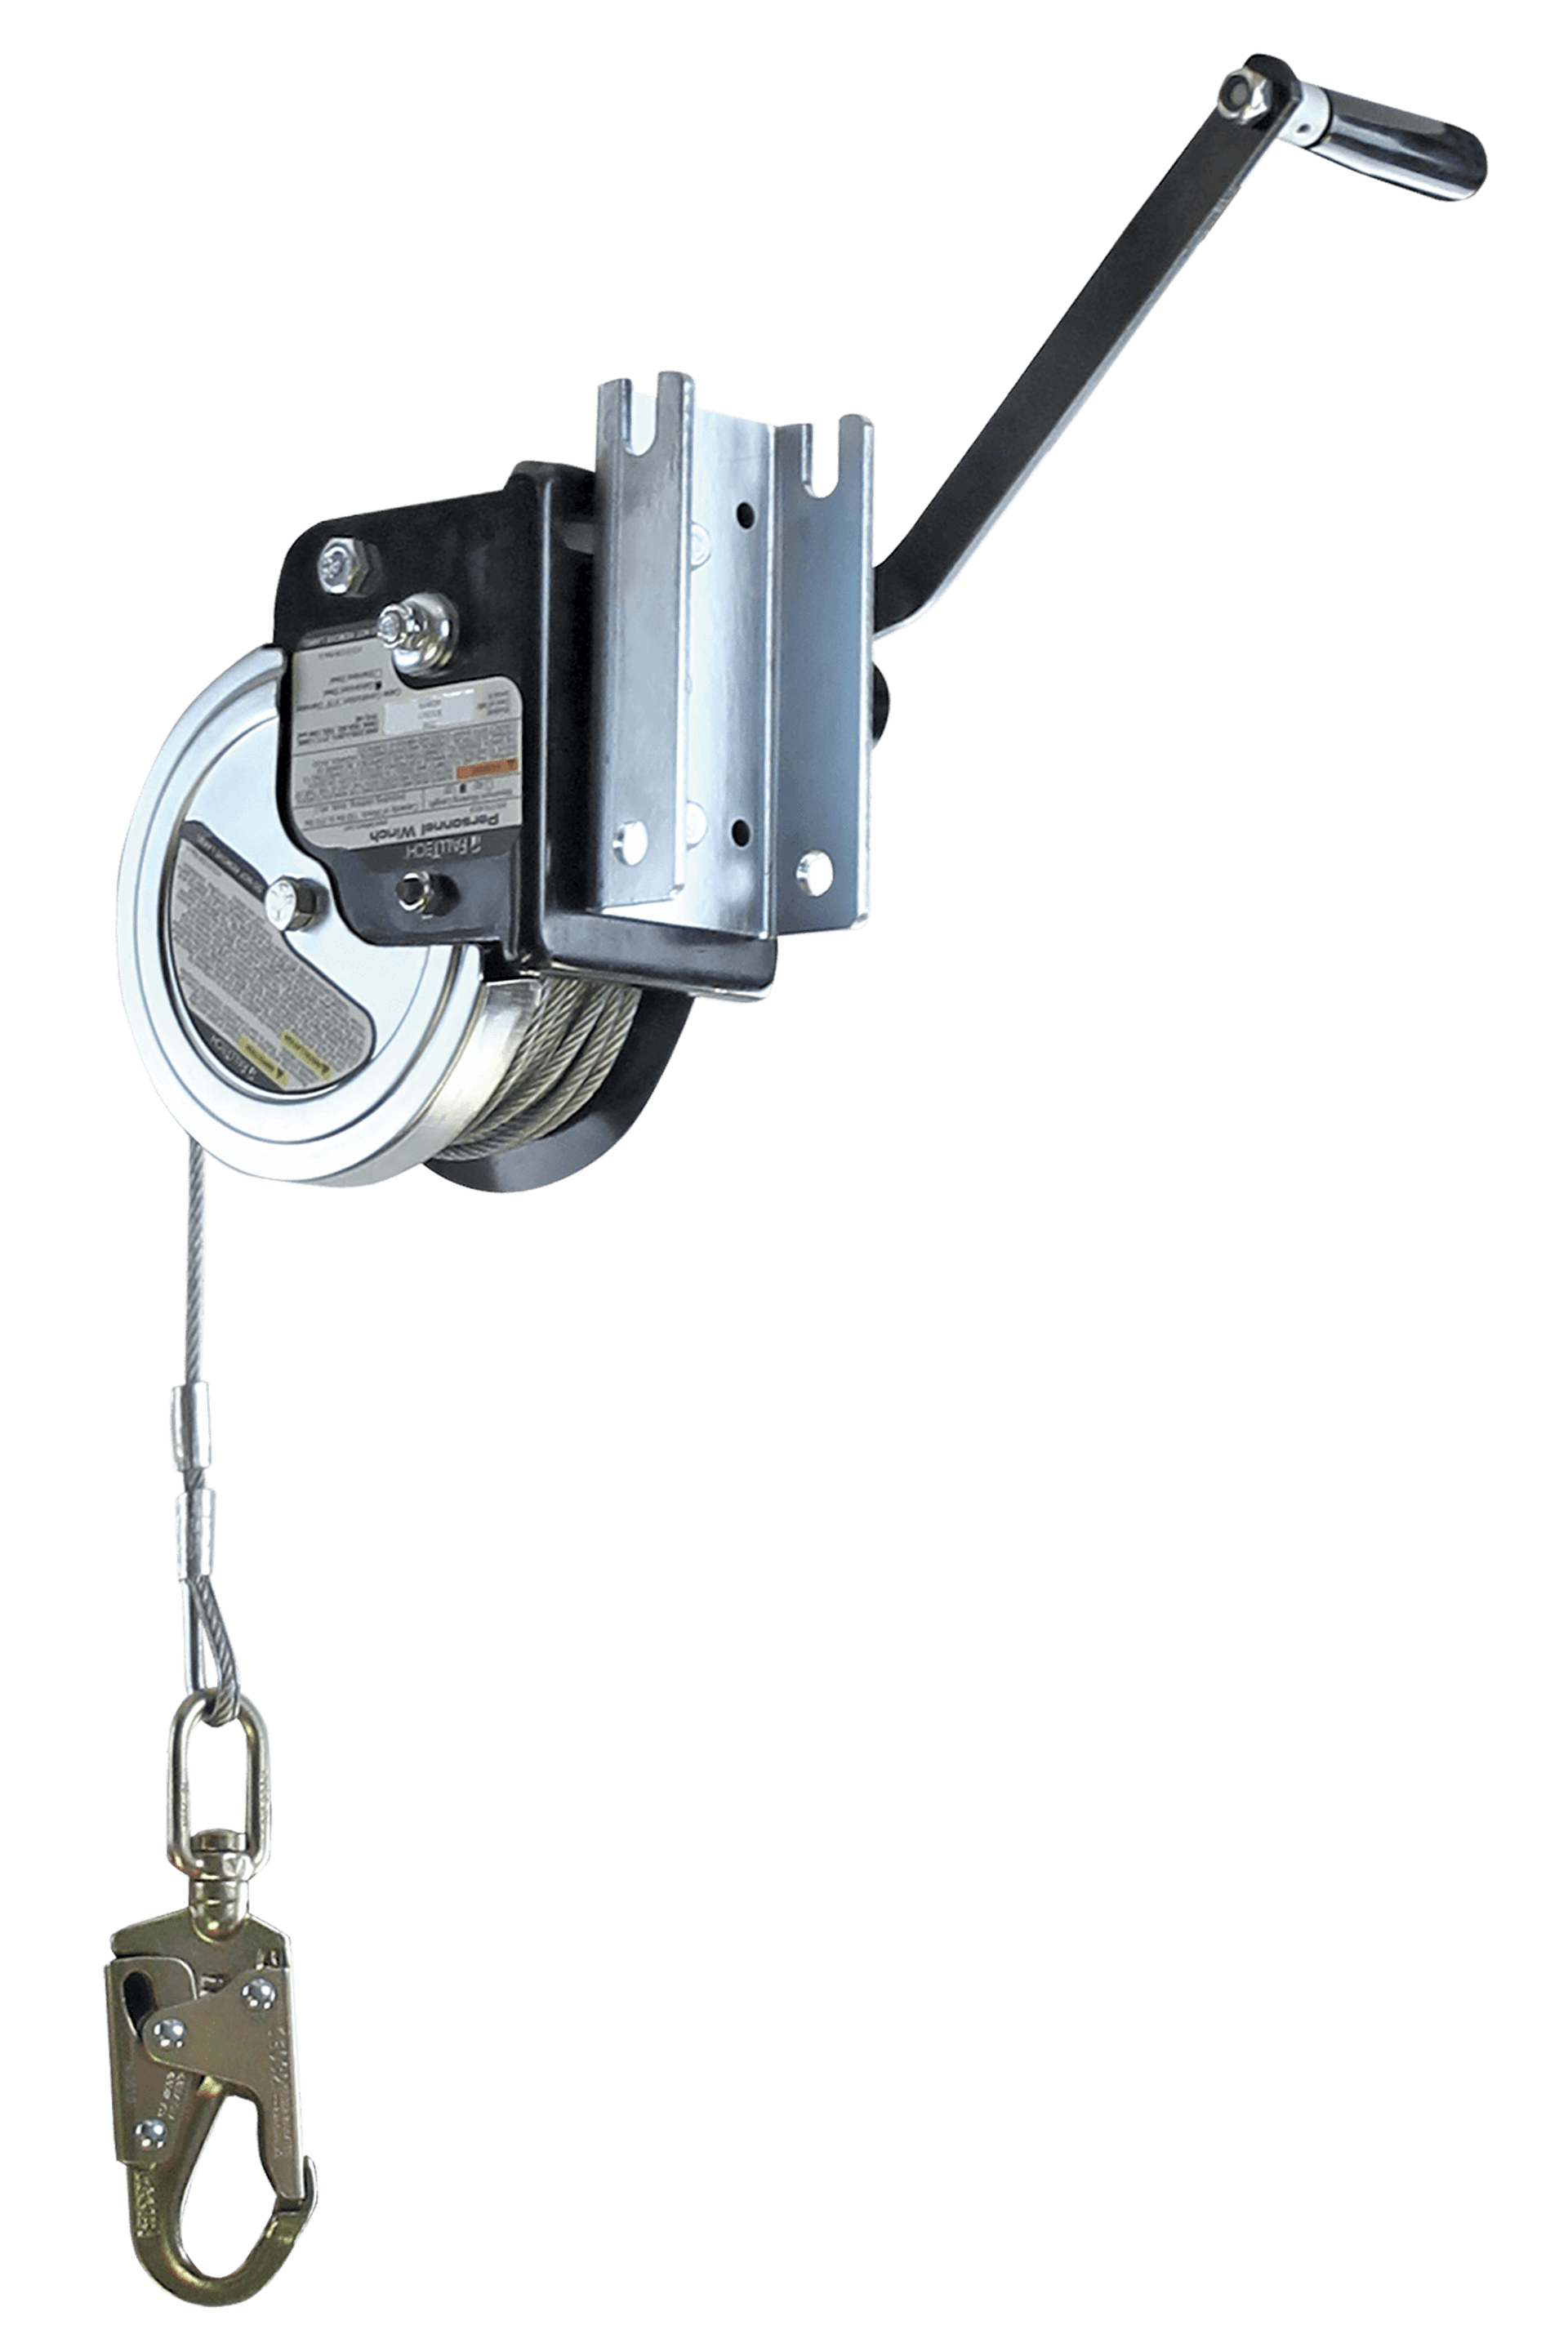 FallTech 7297 Personnel Winch for Tripods and Davits with Galvanized Steel Cable